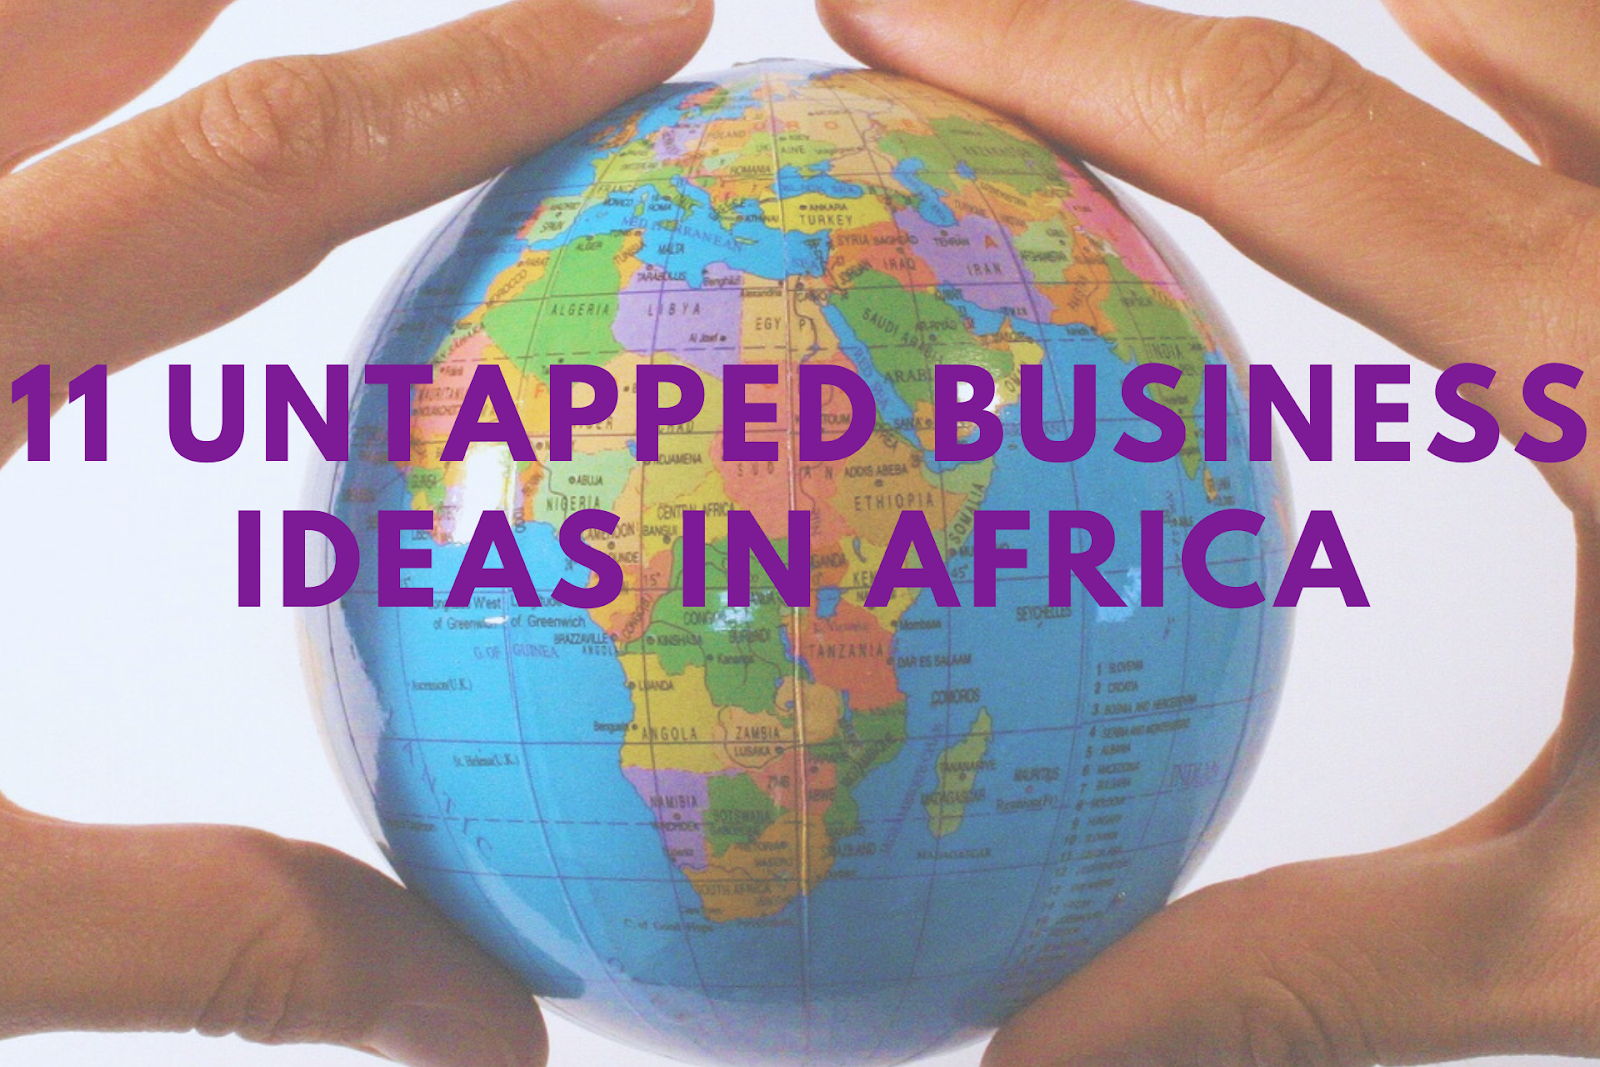 The untapped business ideas in Africa